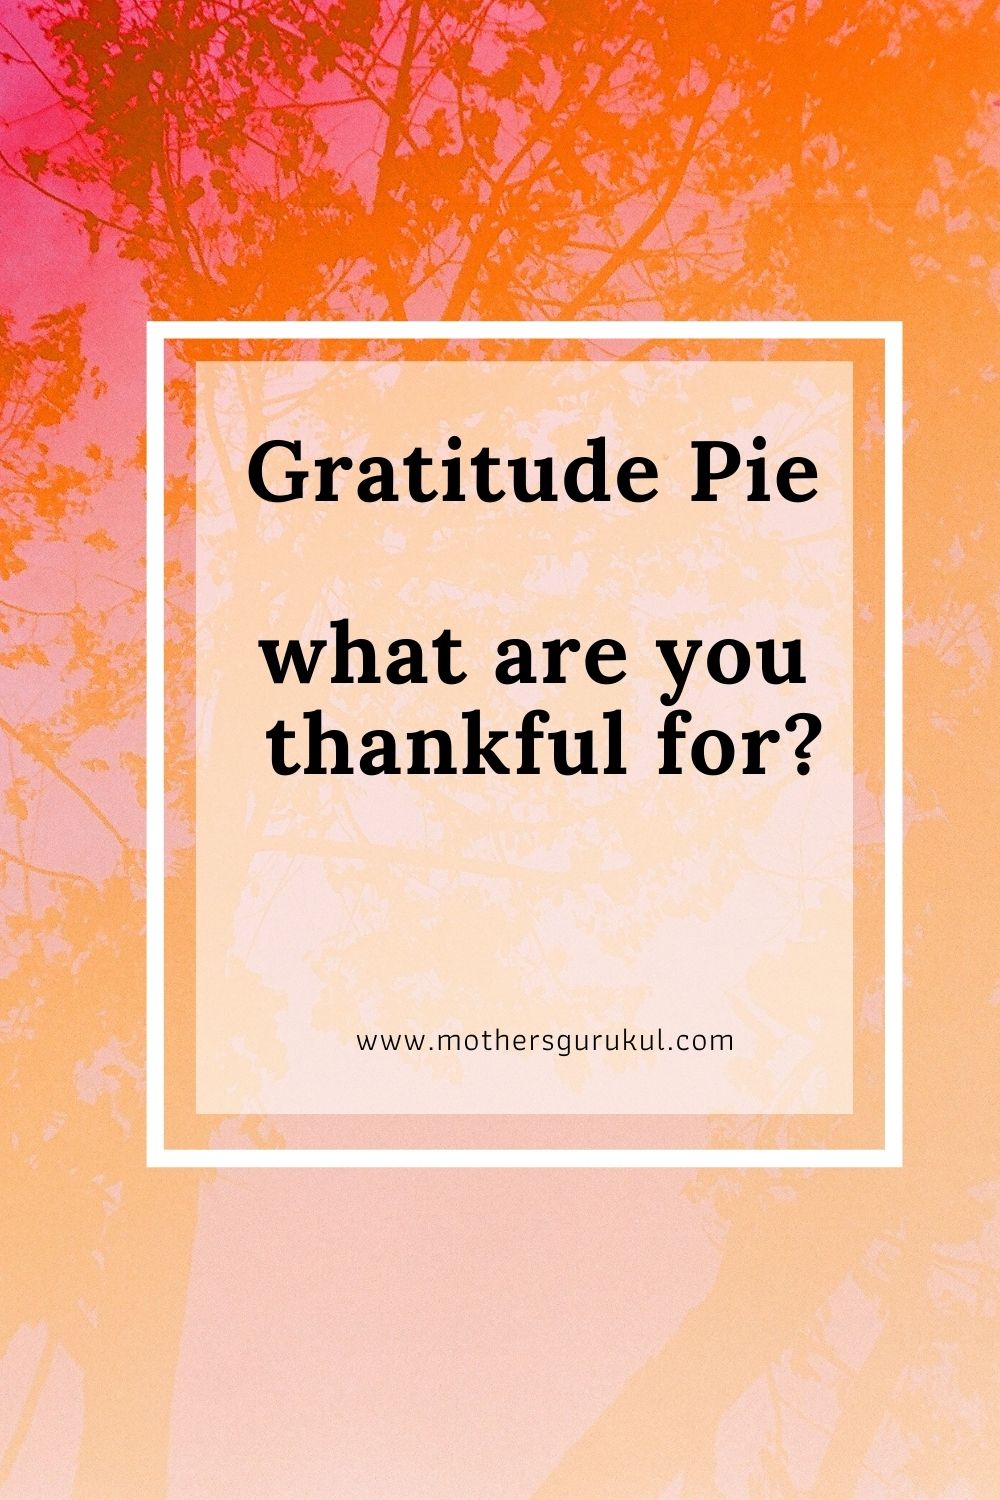 Gratitude Pie: what are you thankful for?